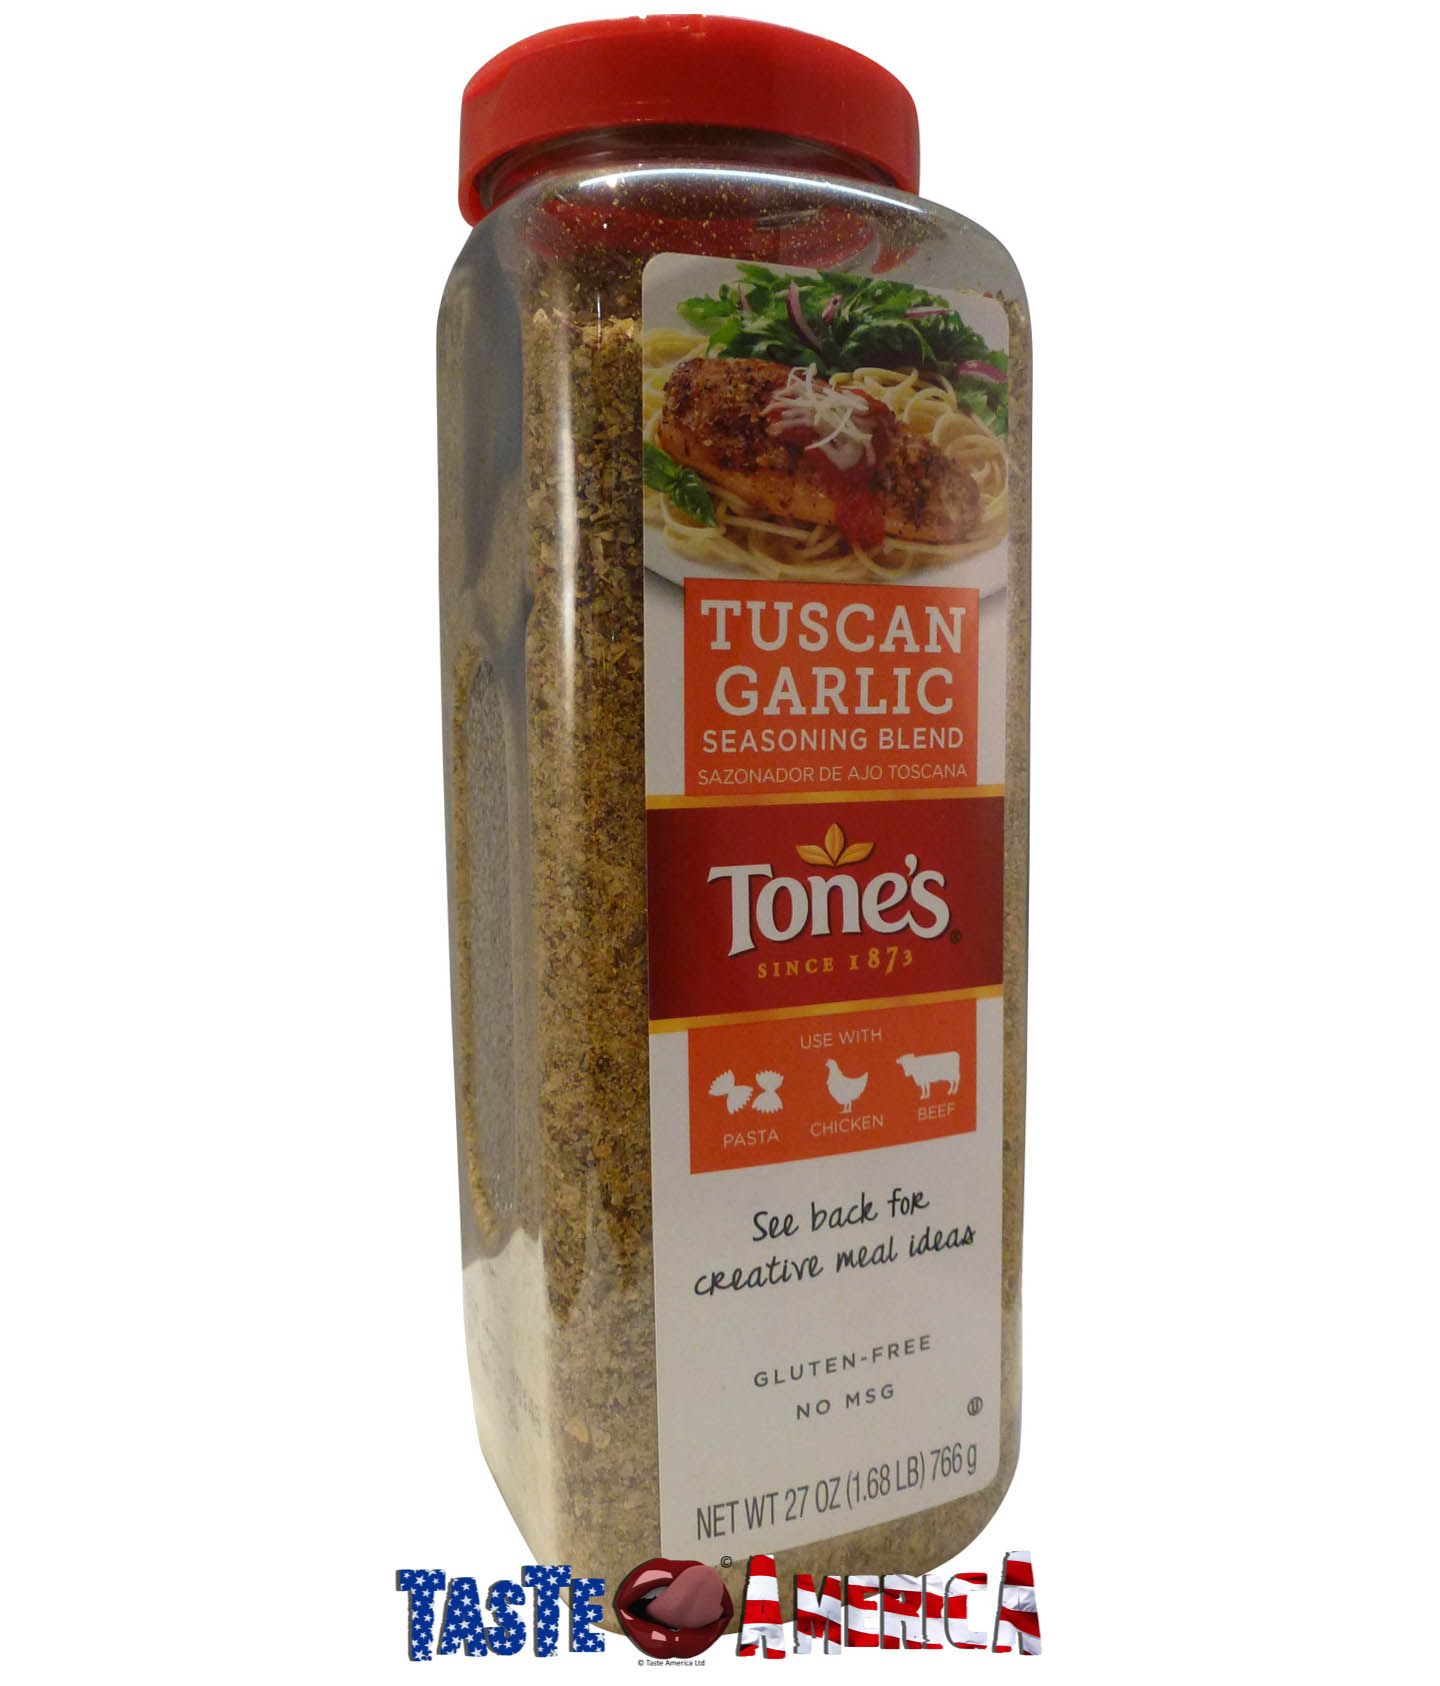 American Spices & Seasonings products in the UK at American Fizz!